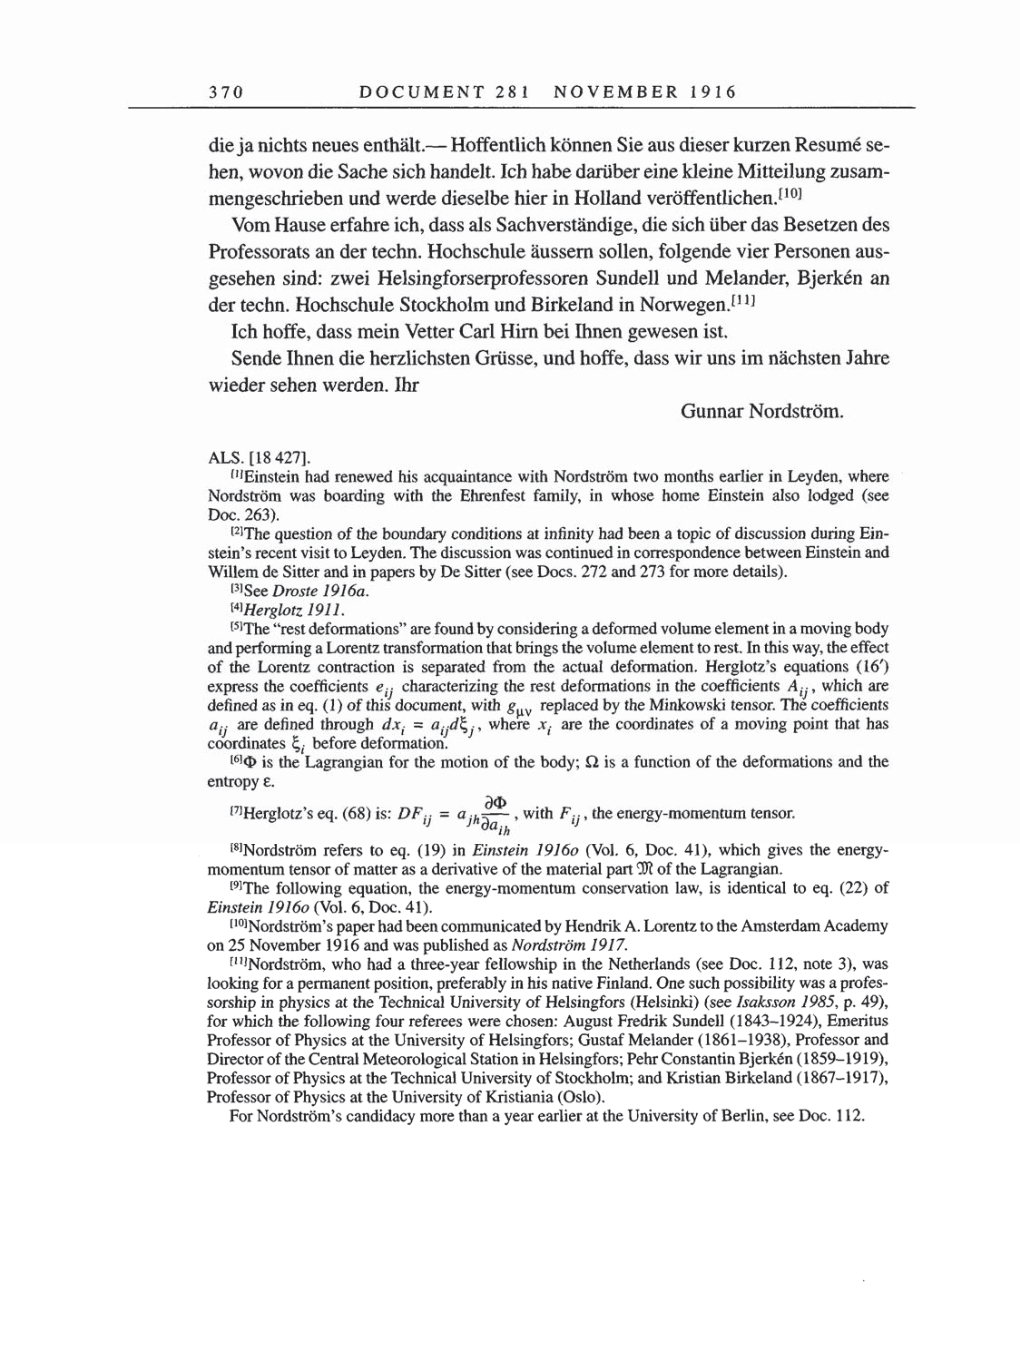 Volume 8, Part A: The Berlin Years: Correspondence 1914-1917 page 370